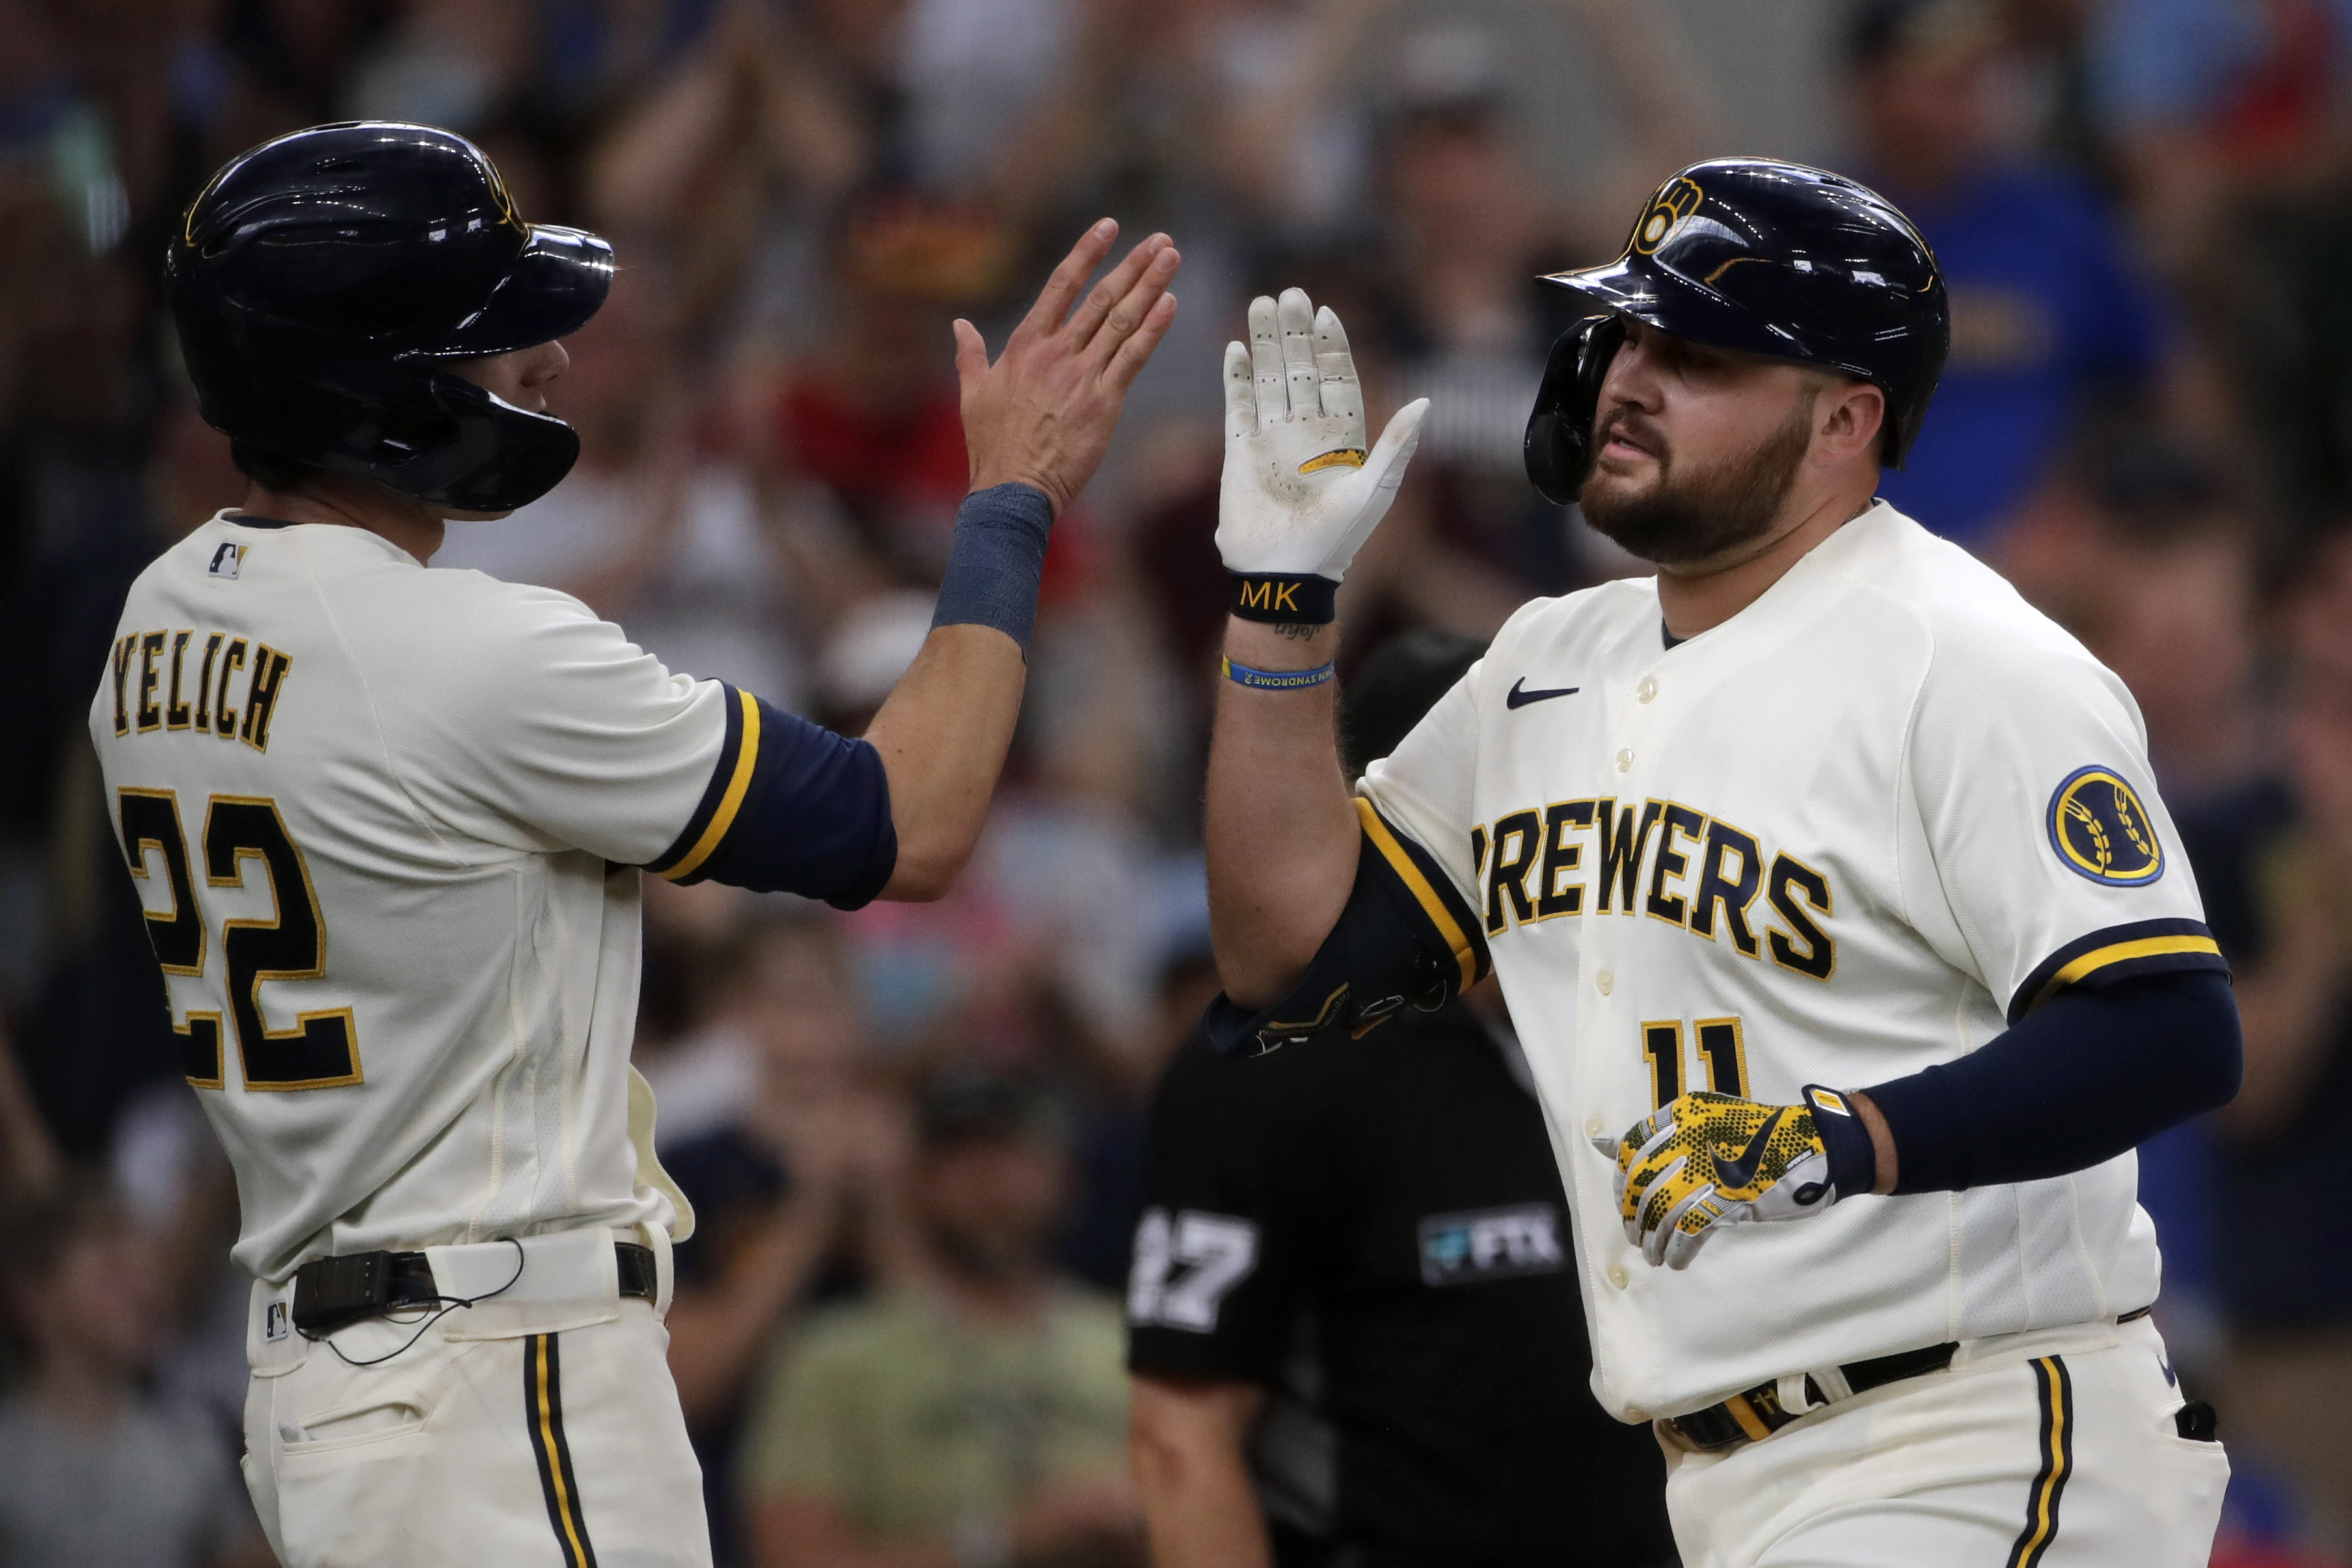 Tellez launches two homers, Brewers breeze past Twins 10-4 Wisconsin News -  Bally Sports